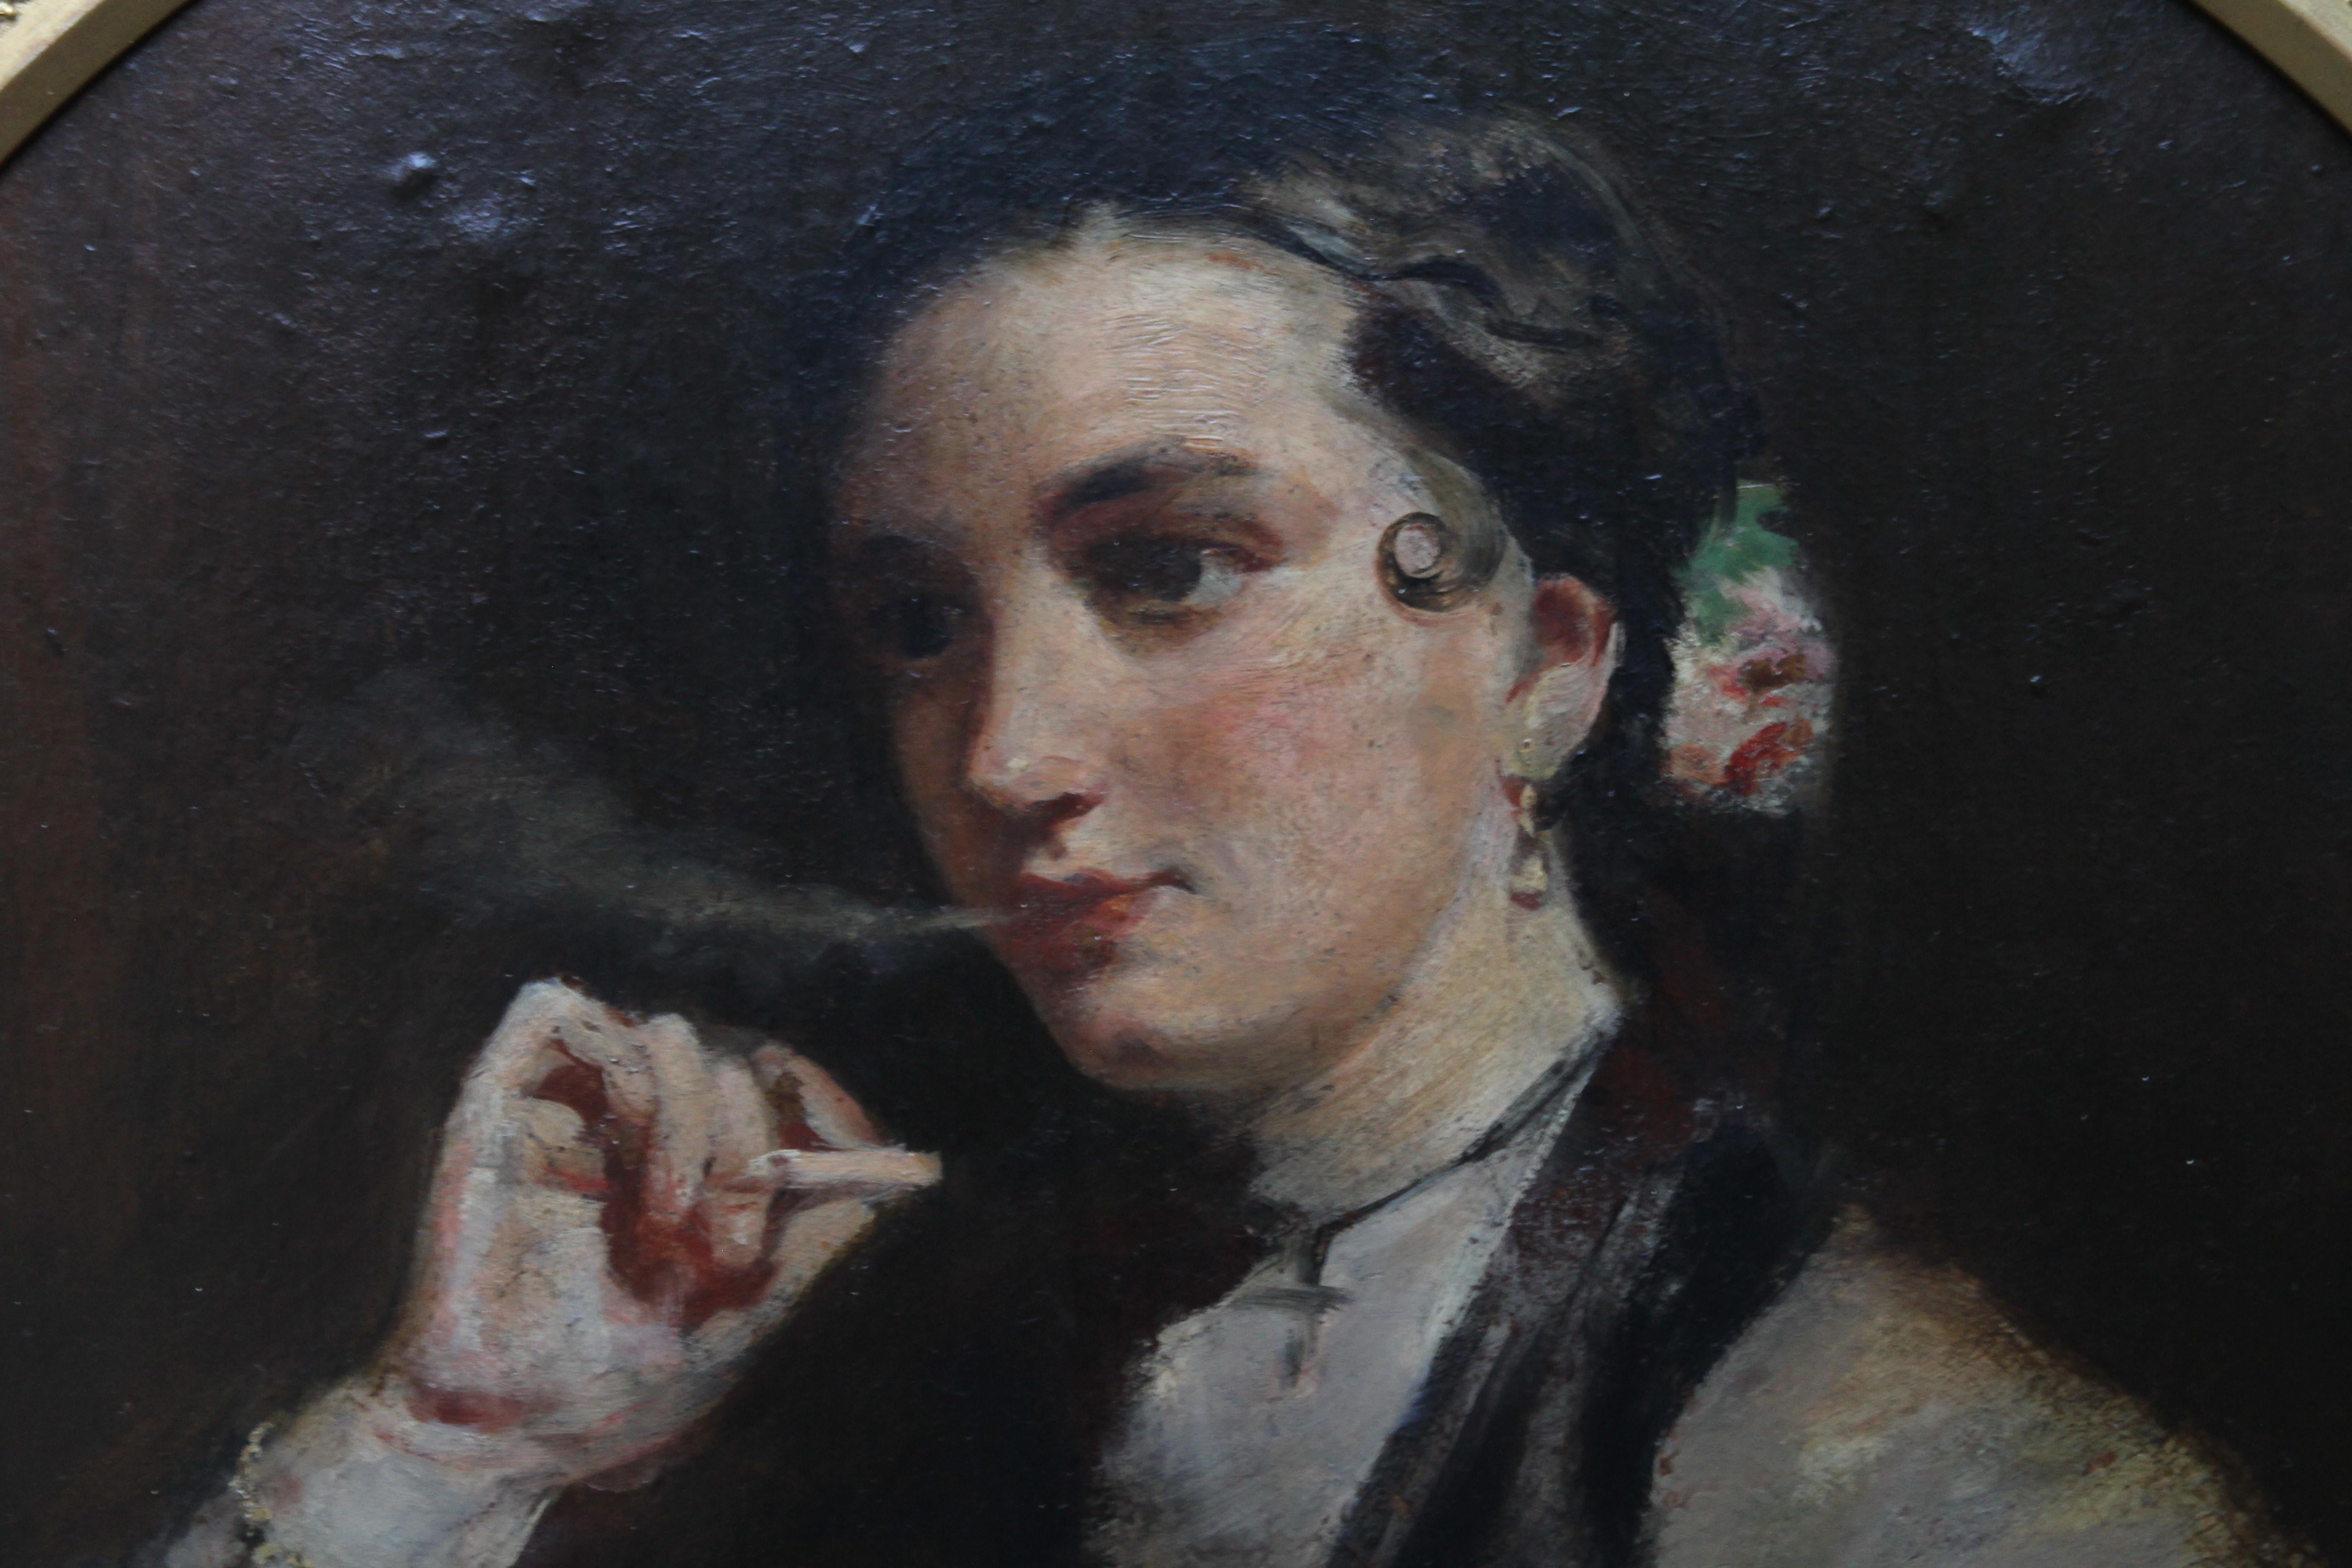 Matilda Wetherall Smoking a Cigarette - British Victorian Portrait oil painting - Realist Painting by Edwin Longsden Long